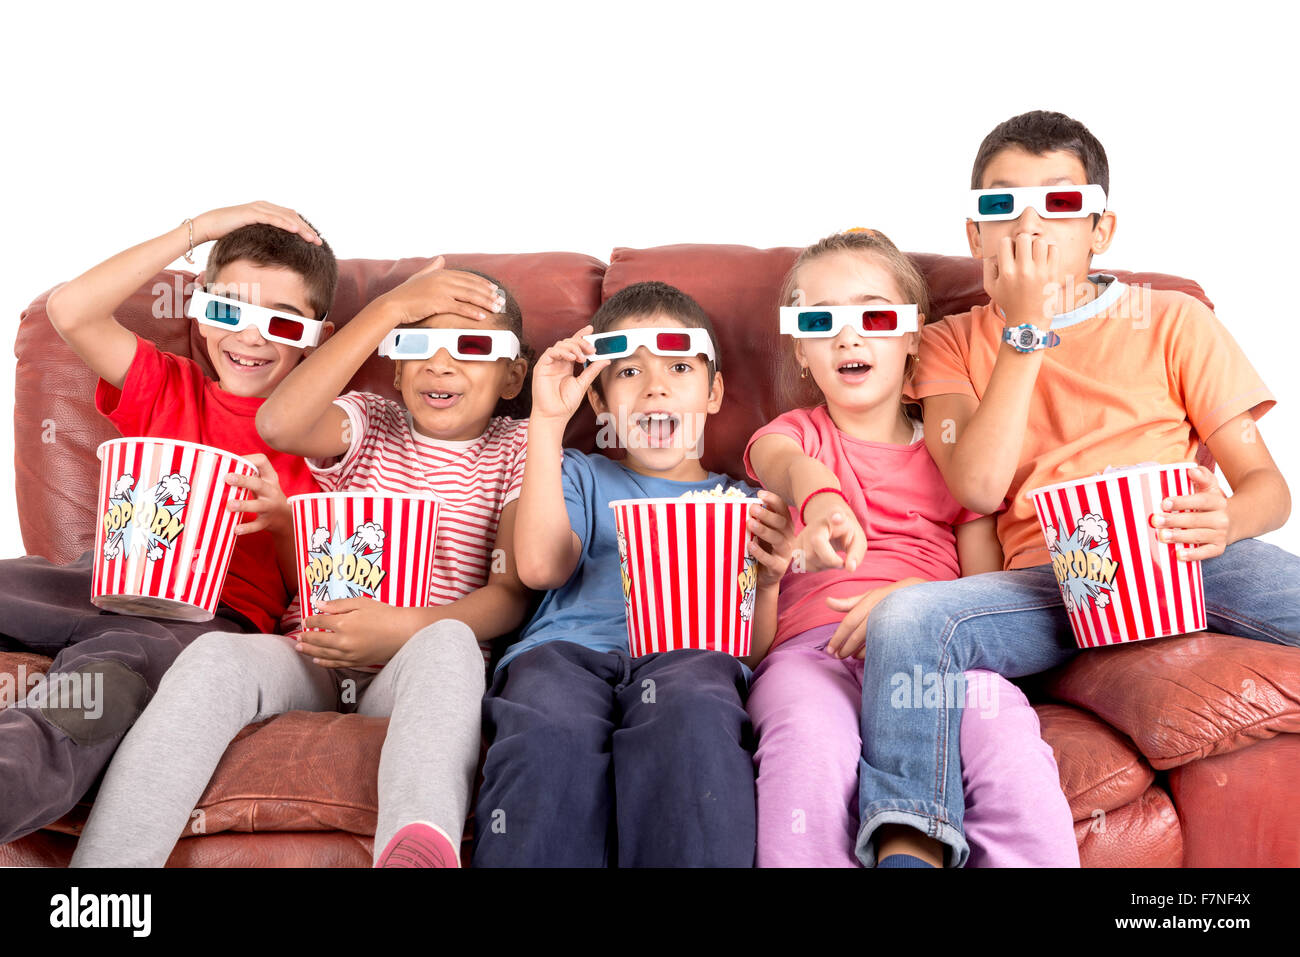 Group of children with 3d glasses and popcorn in a sofa having fun Stock Photo